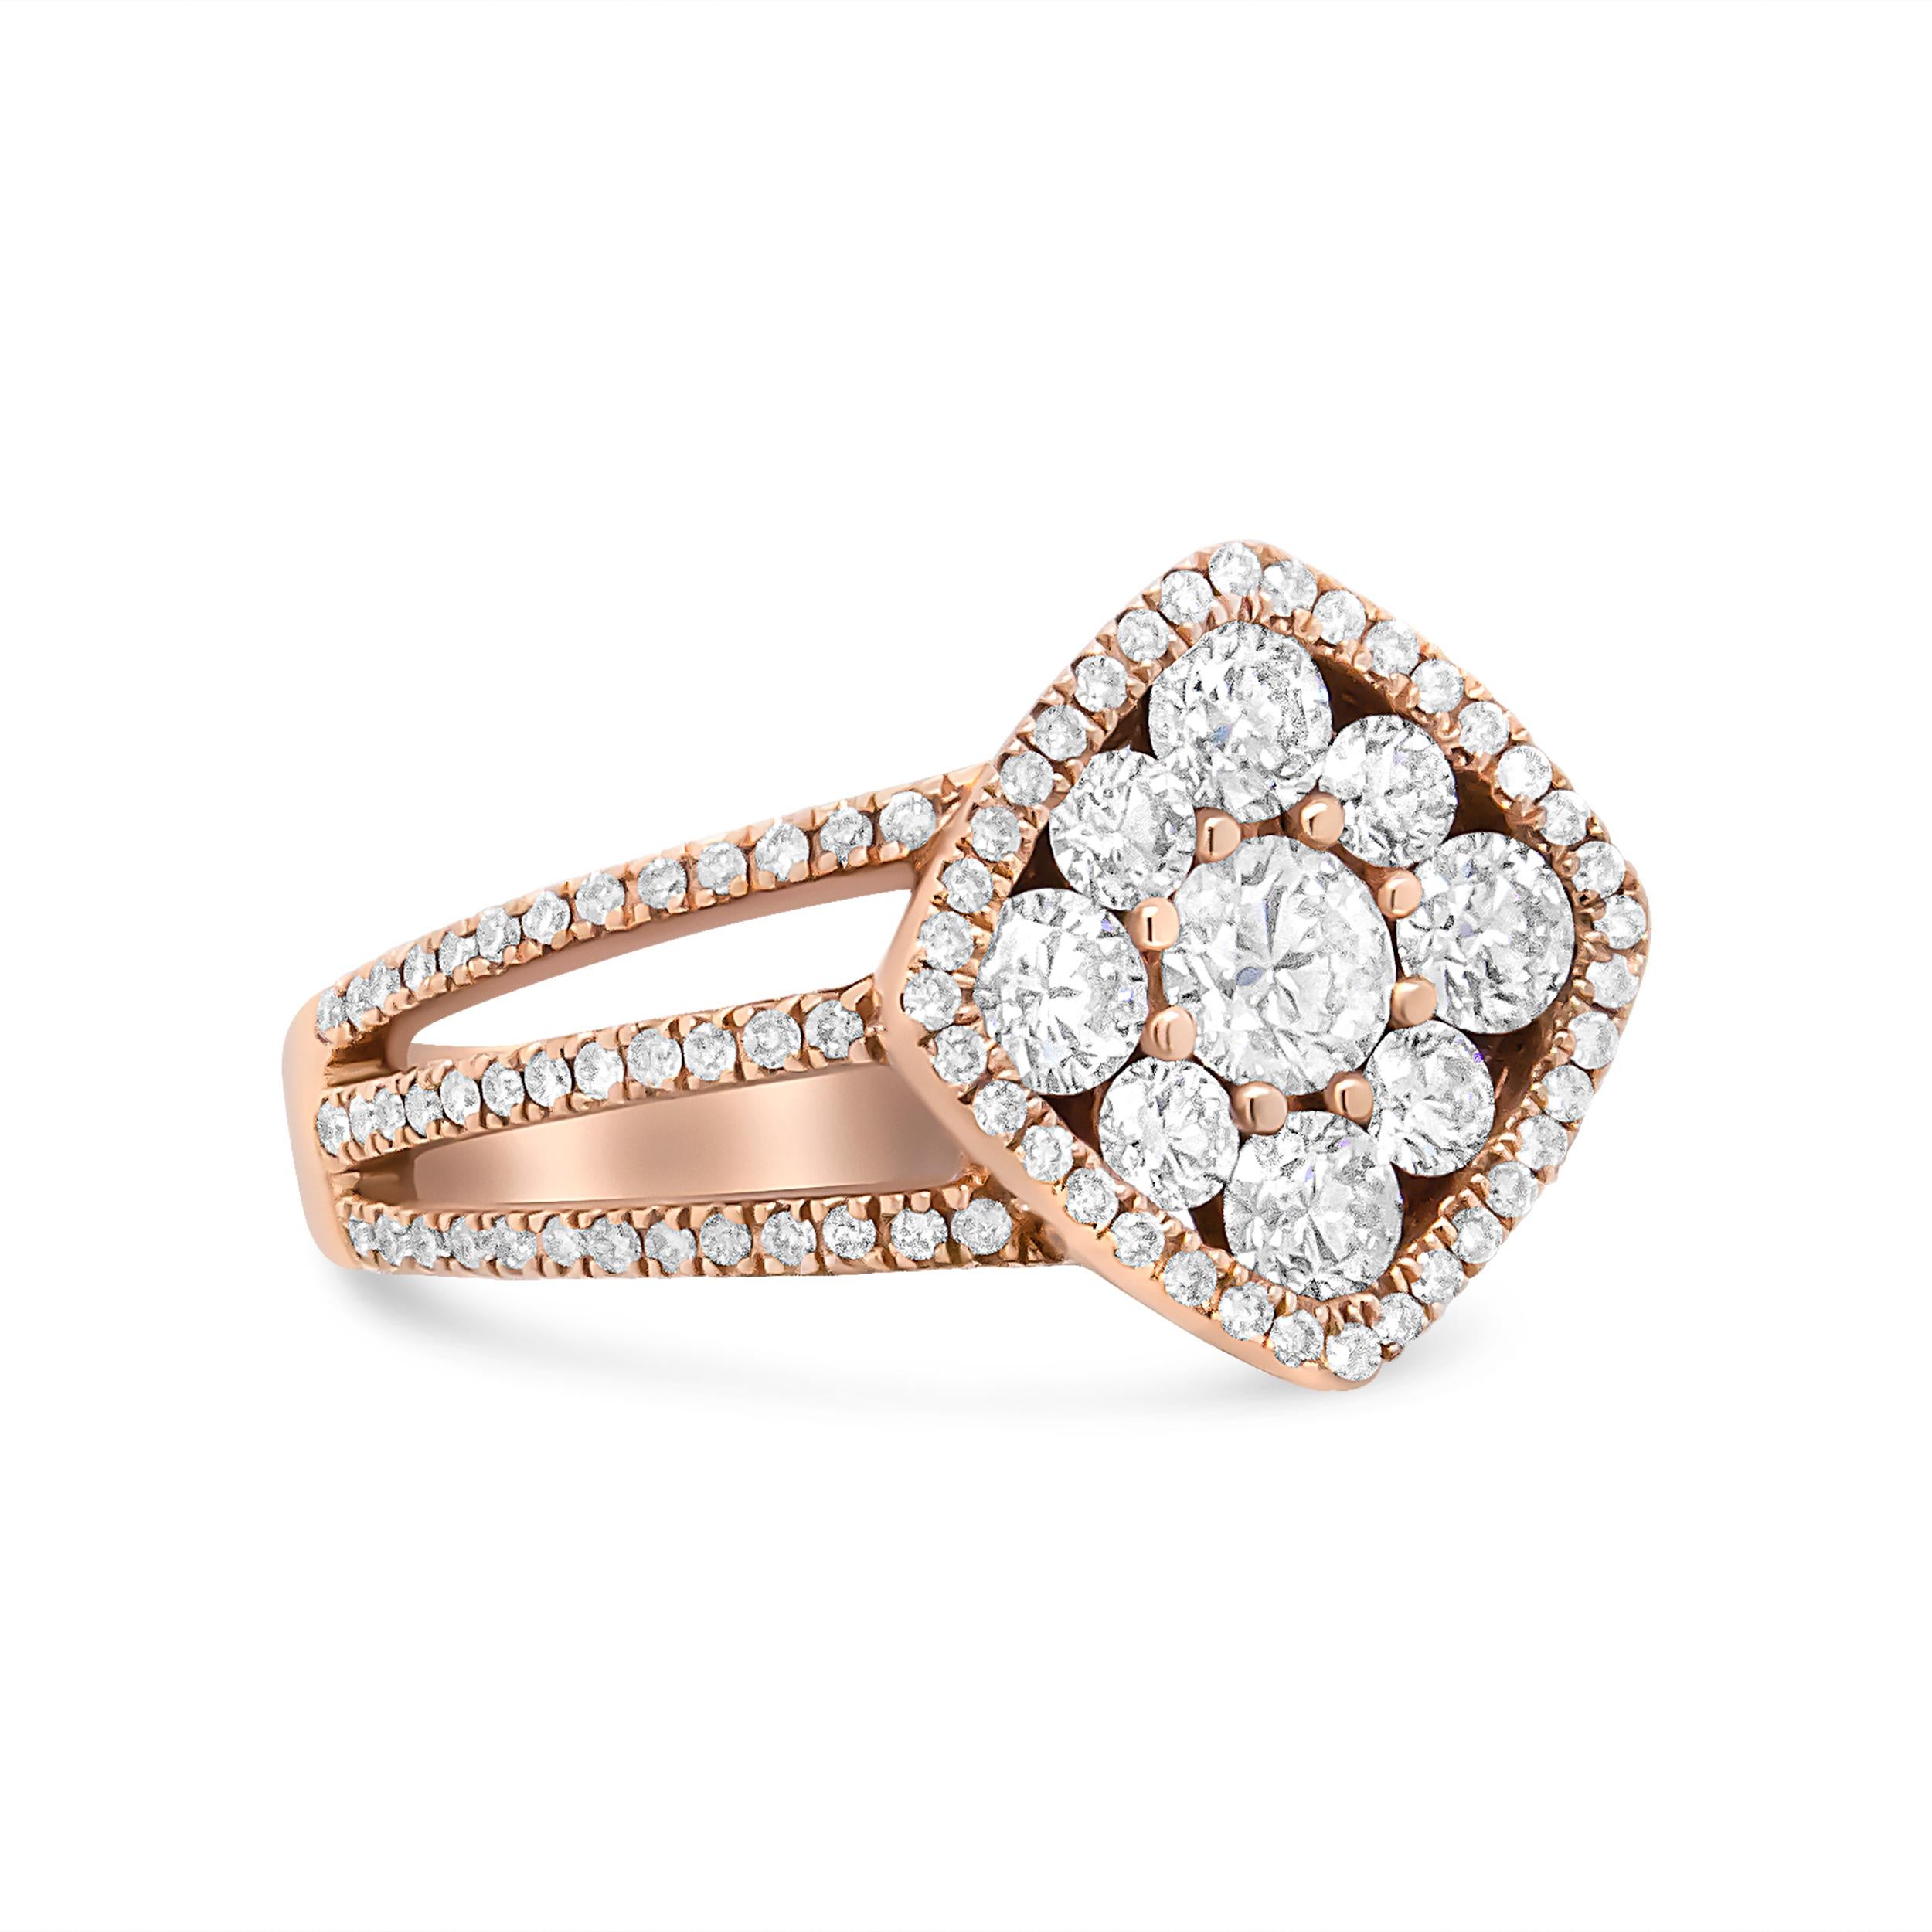 White diamonds shine against the deeper, luxurious rose color of this 18k gold cluster ring. The central motif is in the shape of a rhombus and is embellished with the larger round-cut diamonds of this piece. The rose gold band has a modern